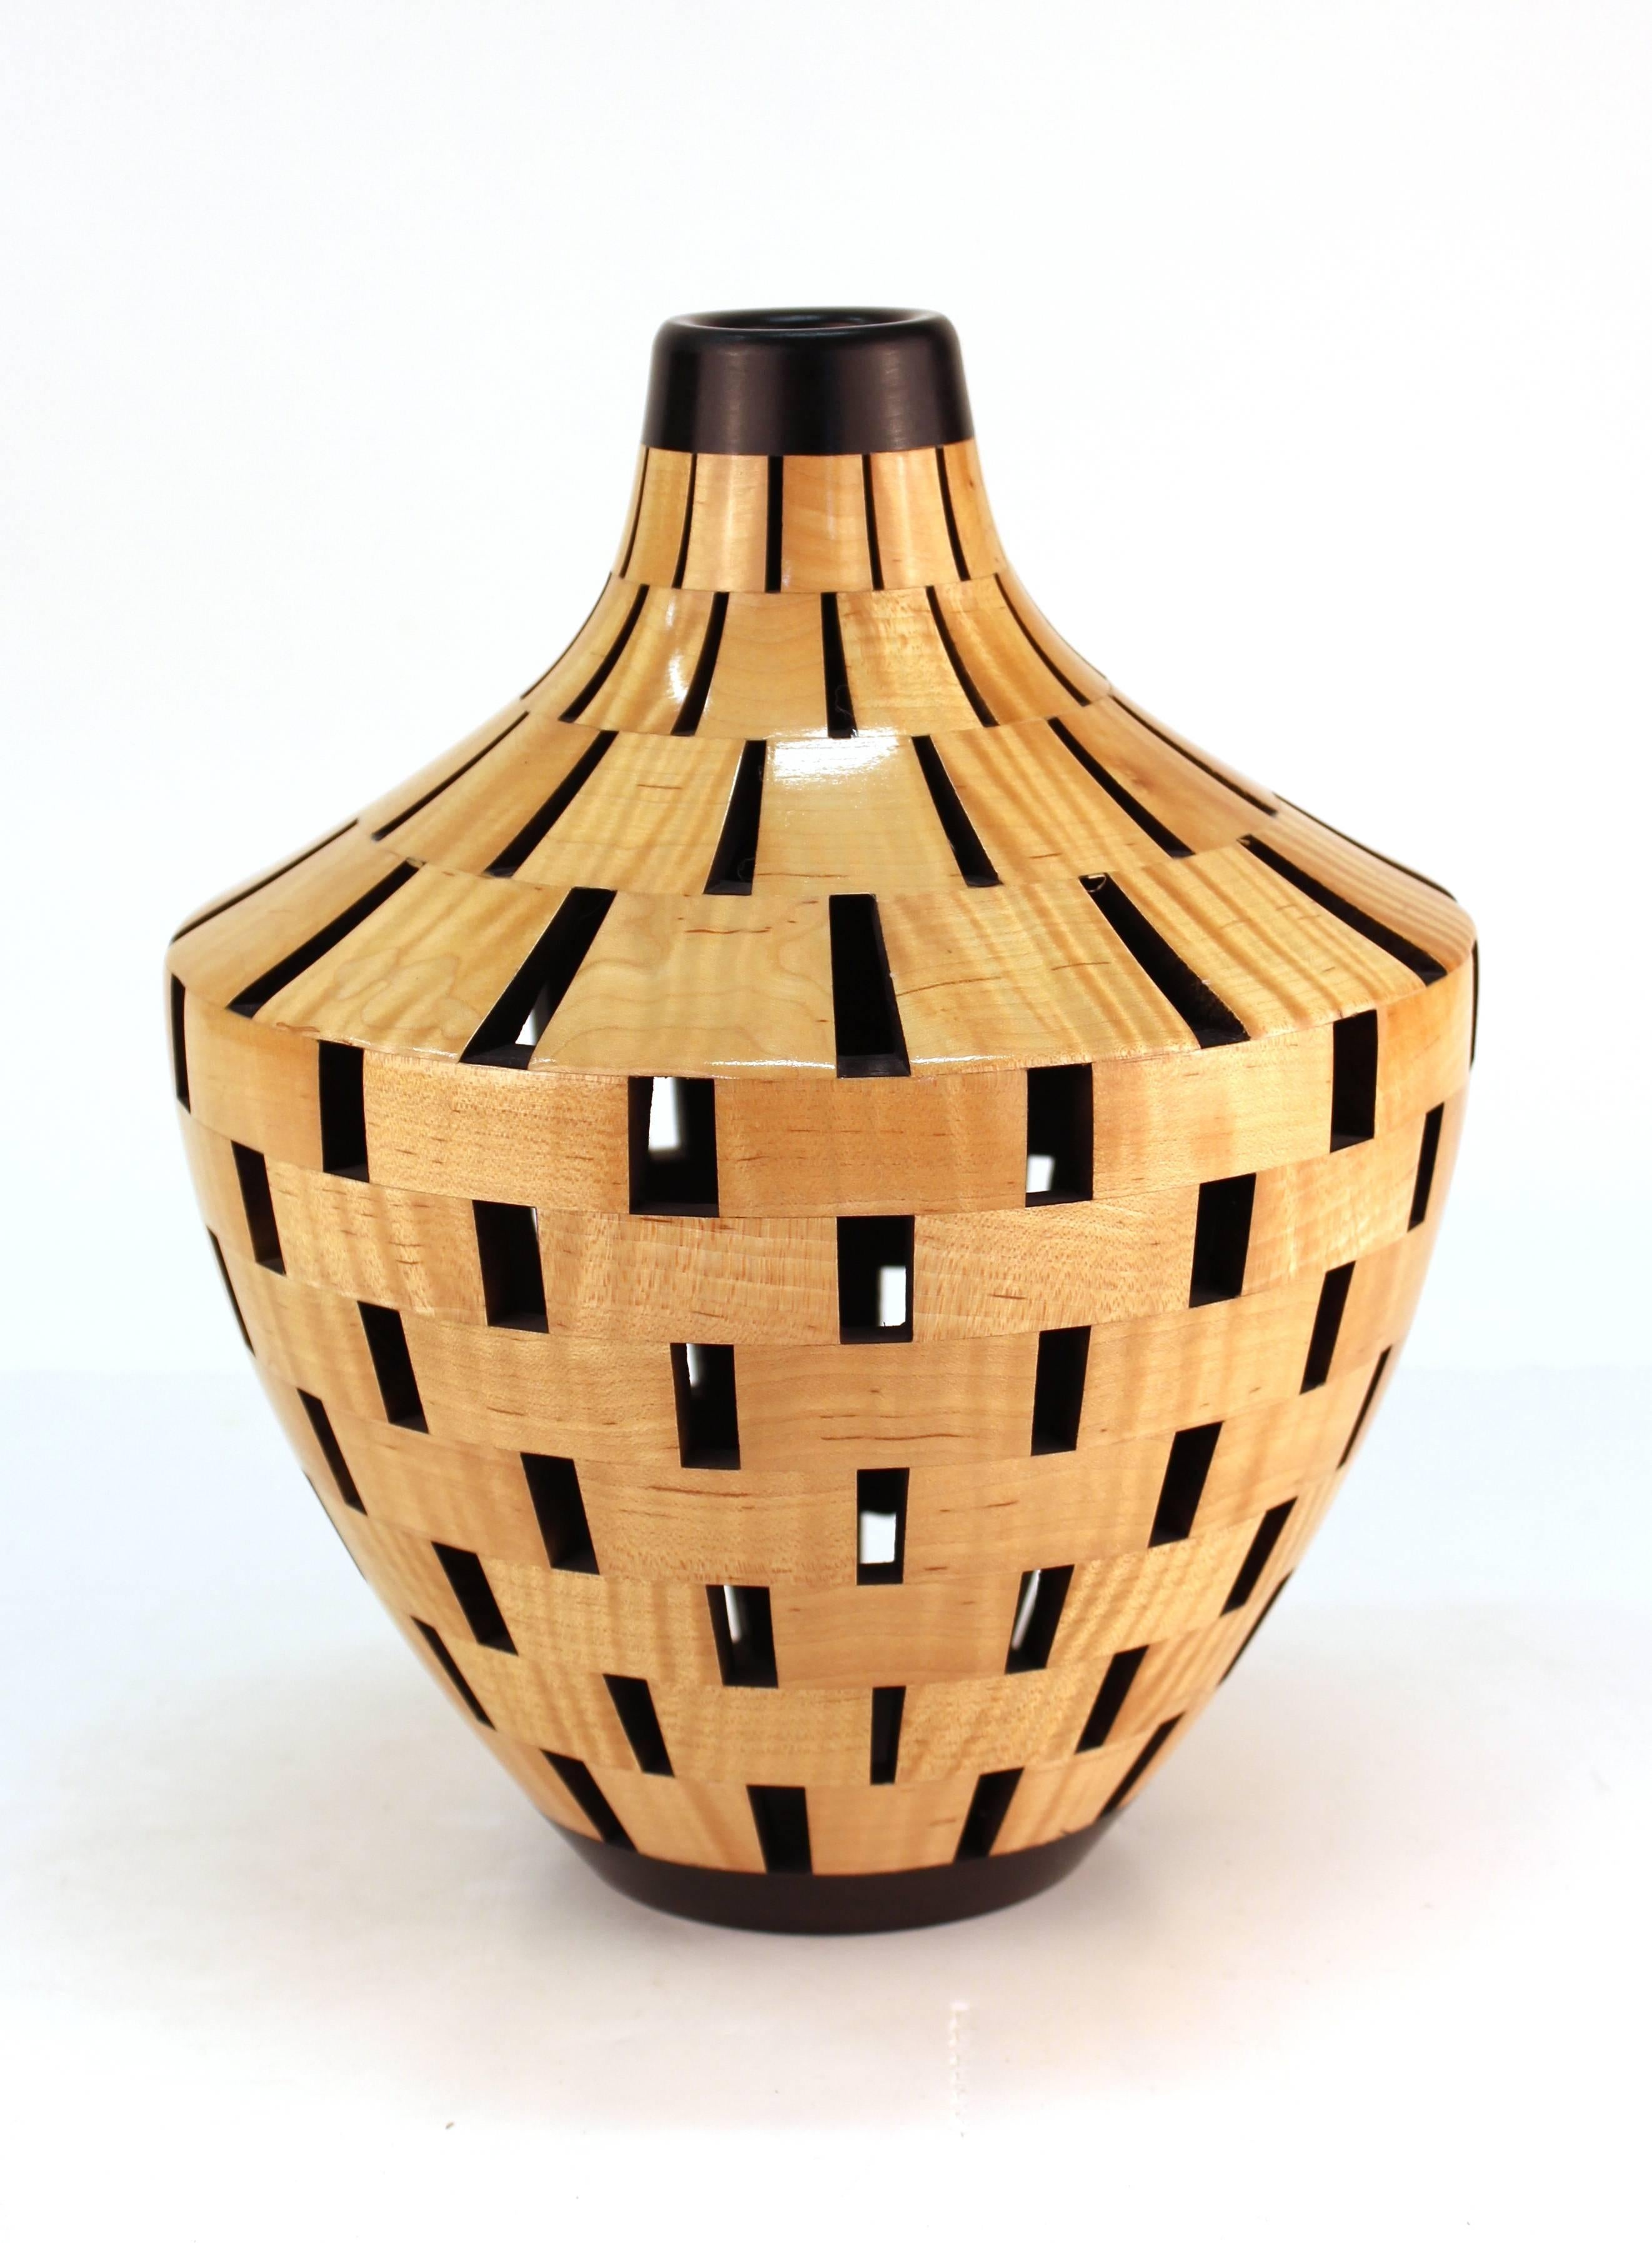 A segmented wooden lacquered vessel made by Joel Hunnicutt. The piece is indicative of Hunnicutt's artistic style and is in great condition. Signed on the bottom.